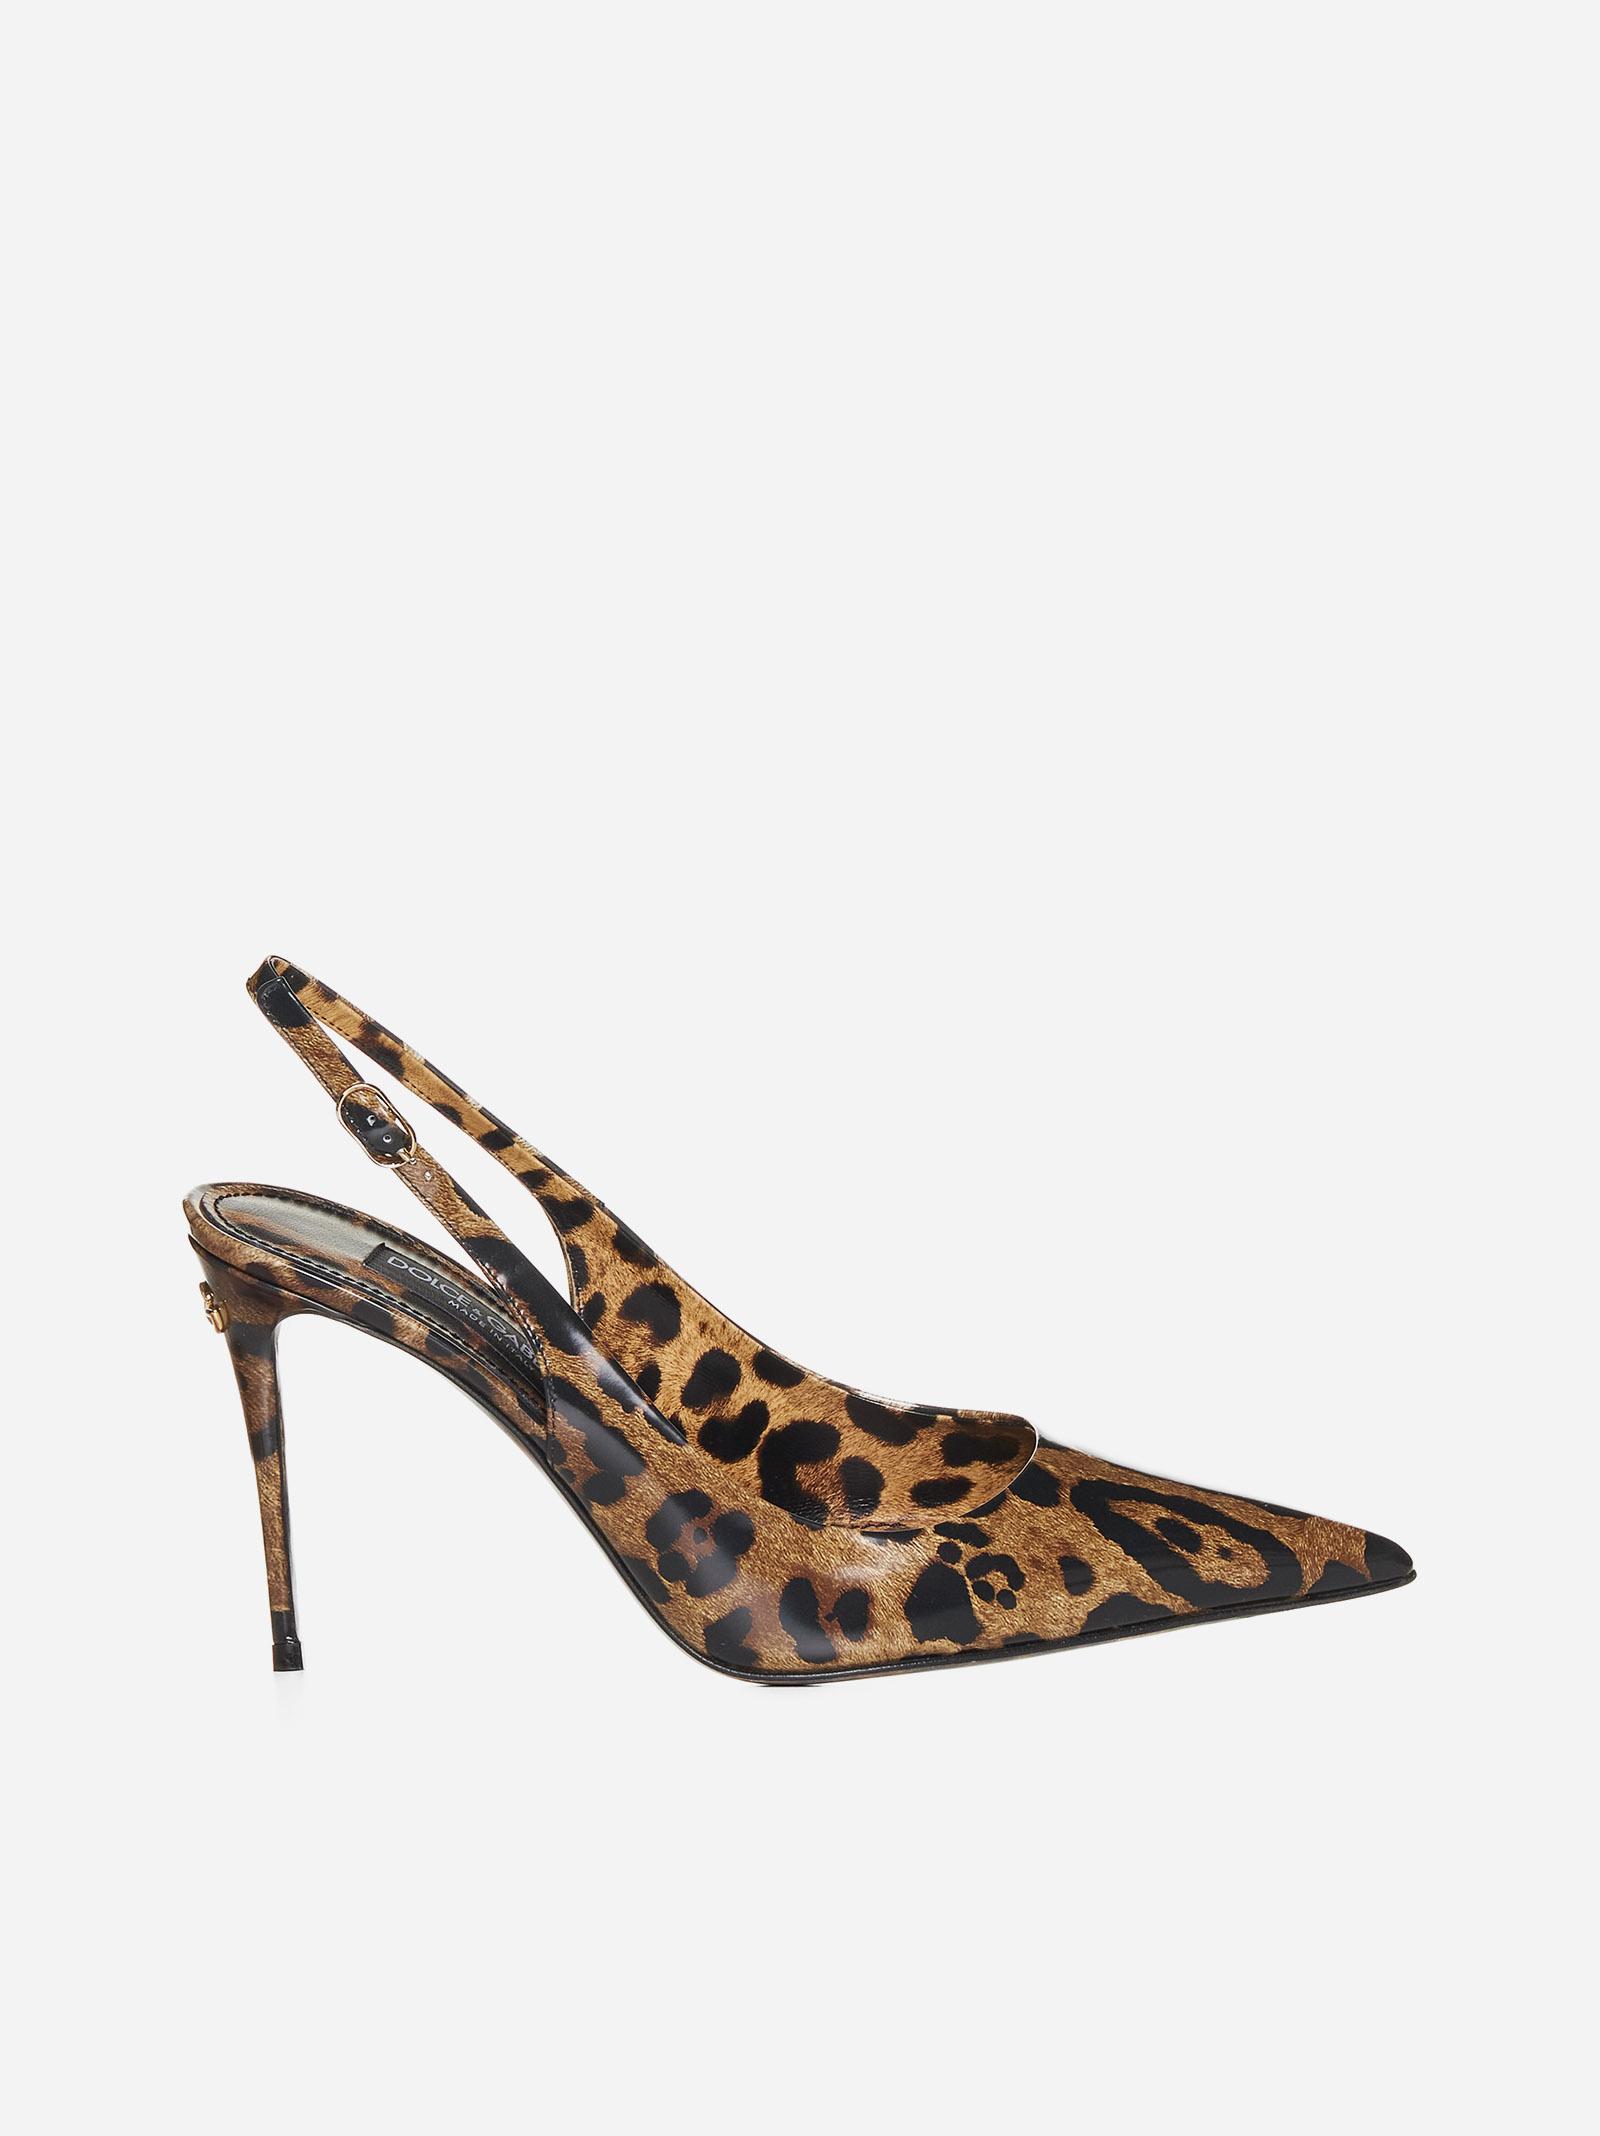 Dolce & Gabbana Animalier Patent Leather Slingback Pumps in White | Lyst